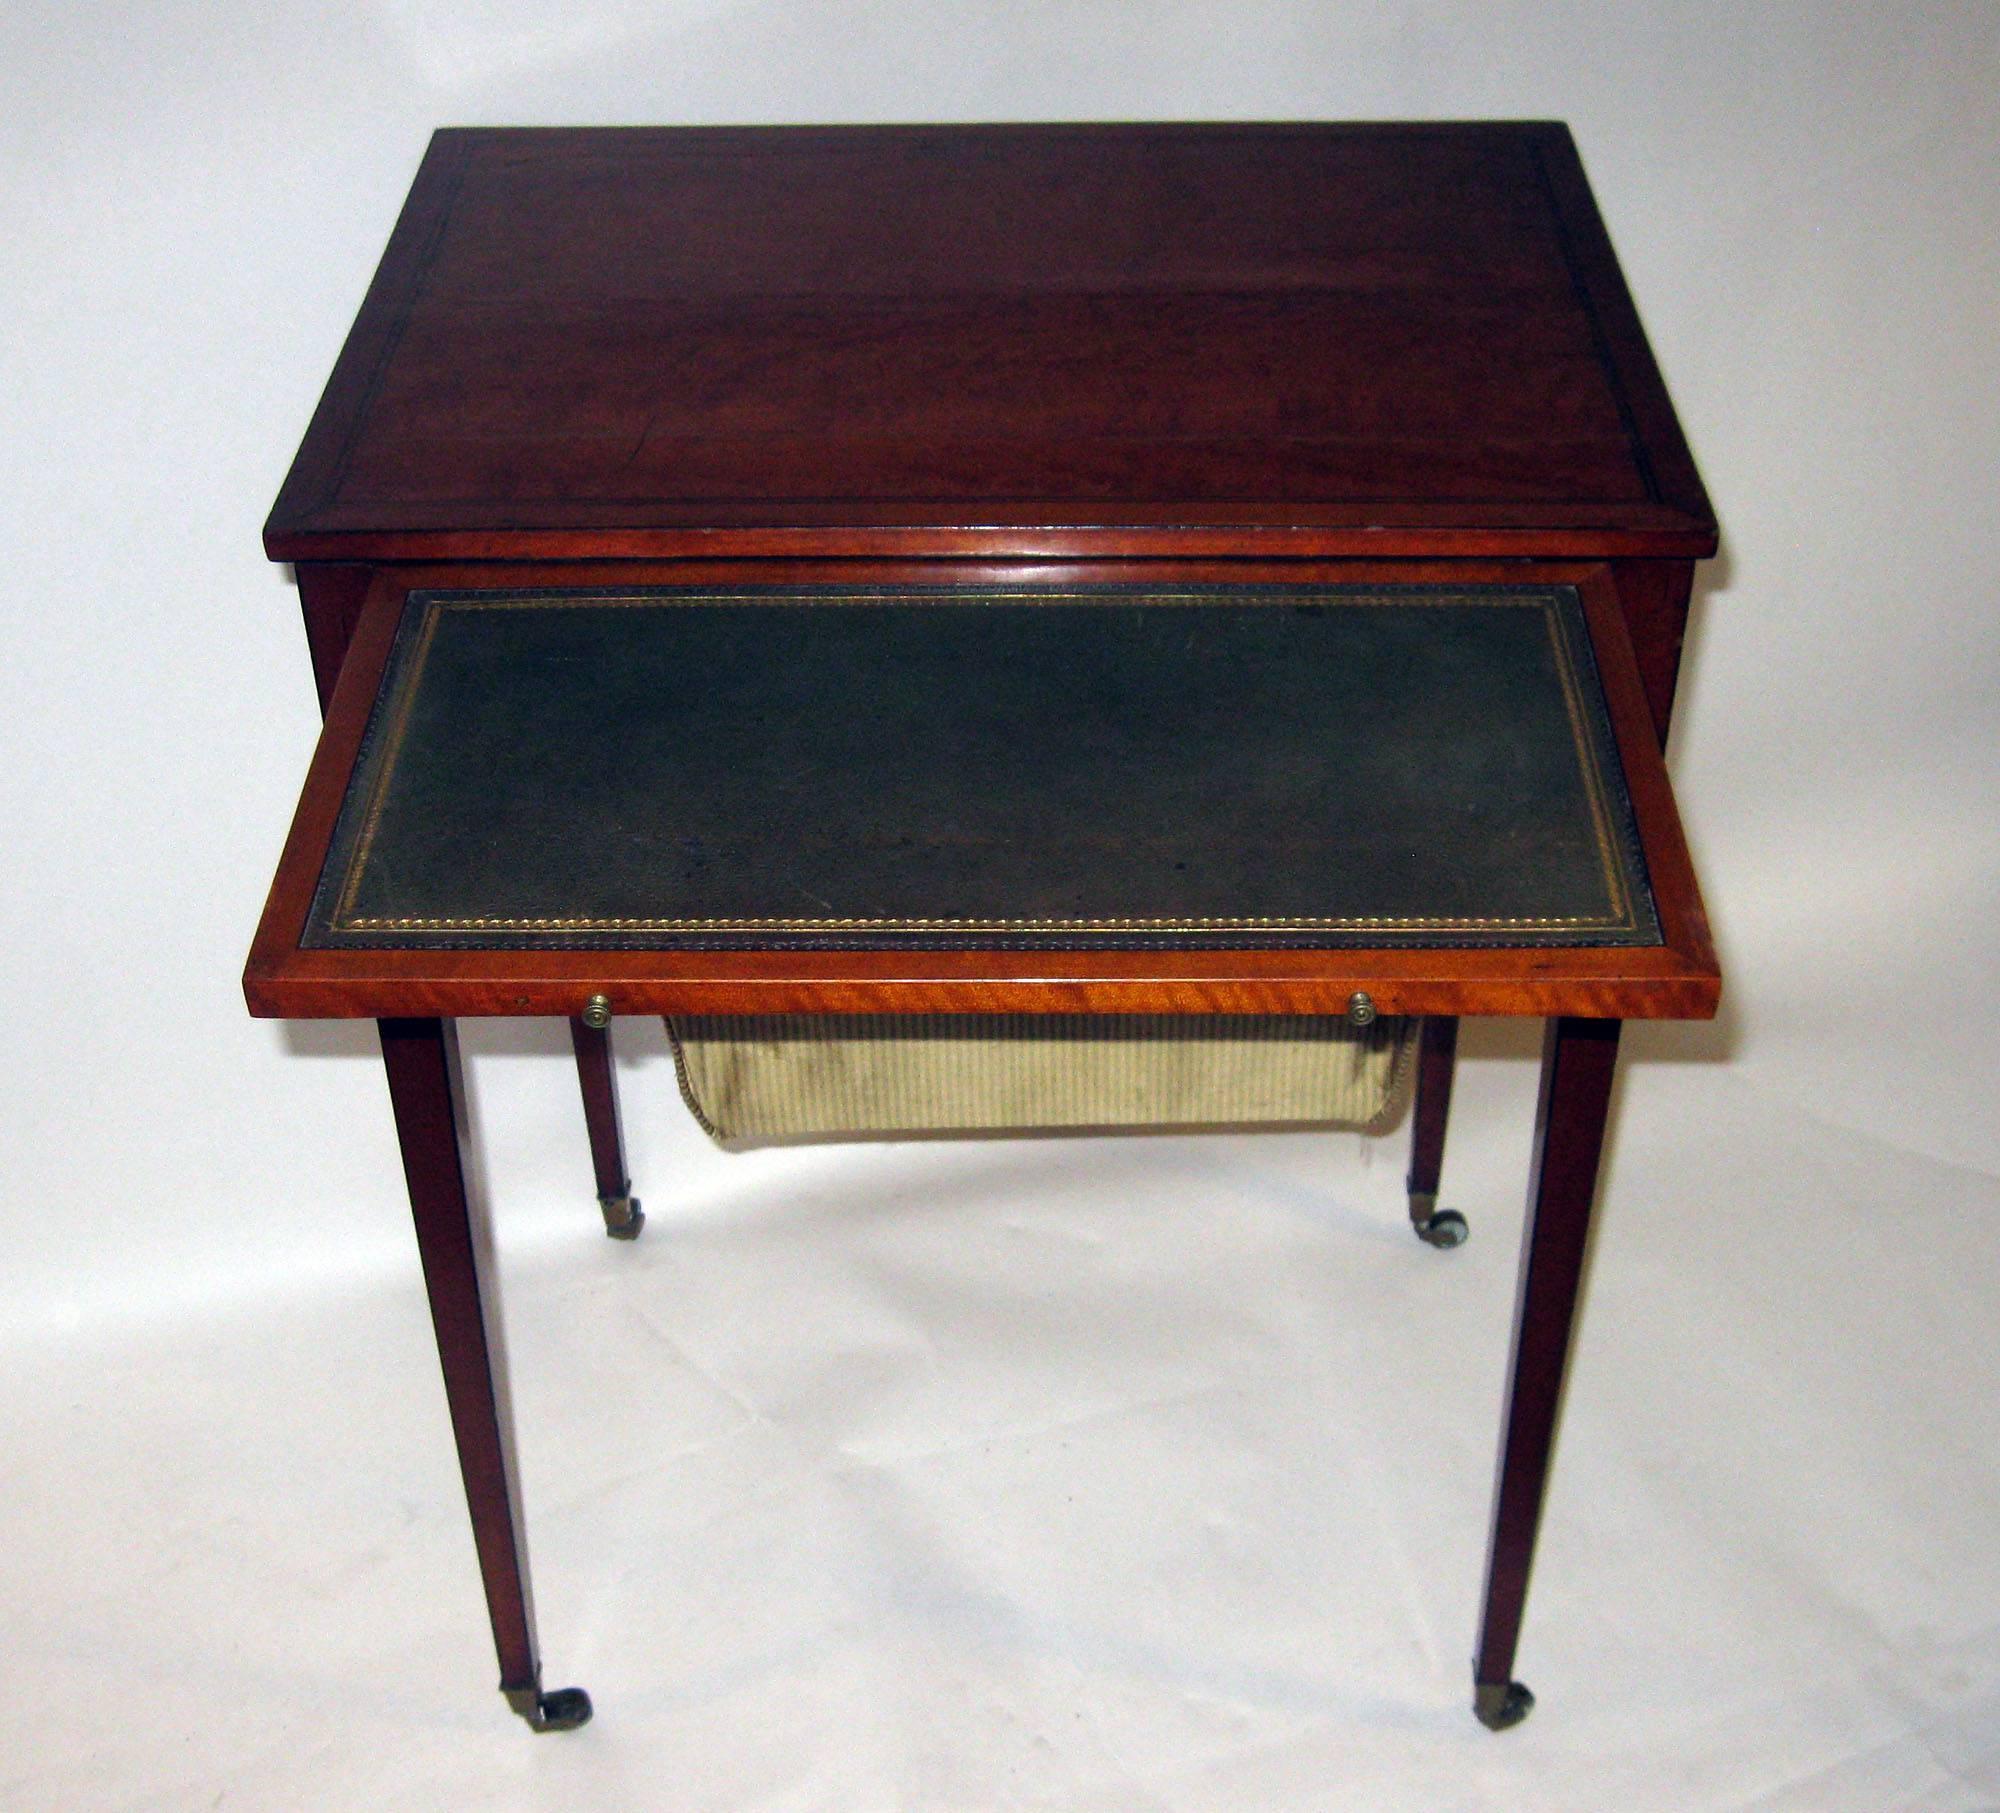 Late 18th Century 18th century Hepplewhite Satinwood Writing Table with Work with Silk Basket For Sale